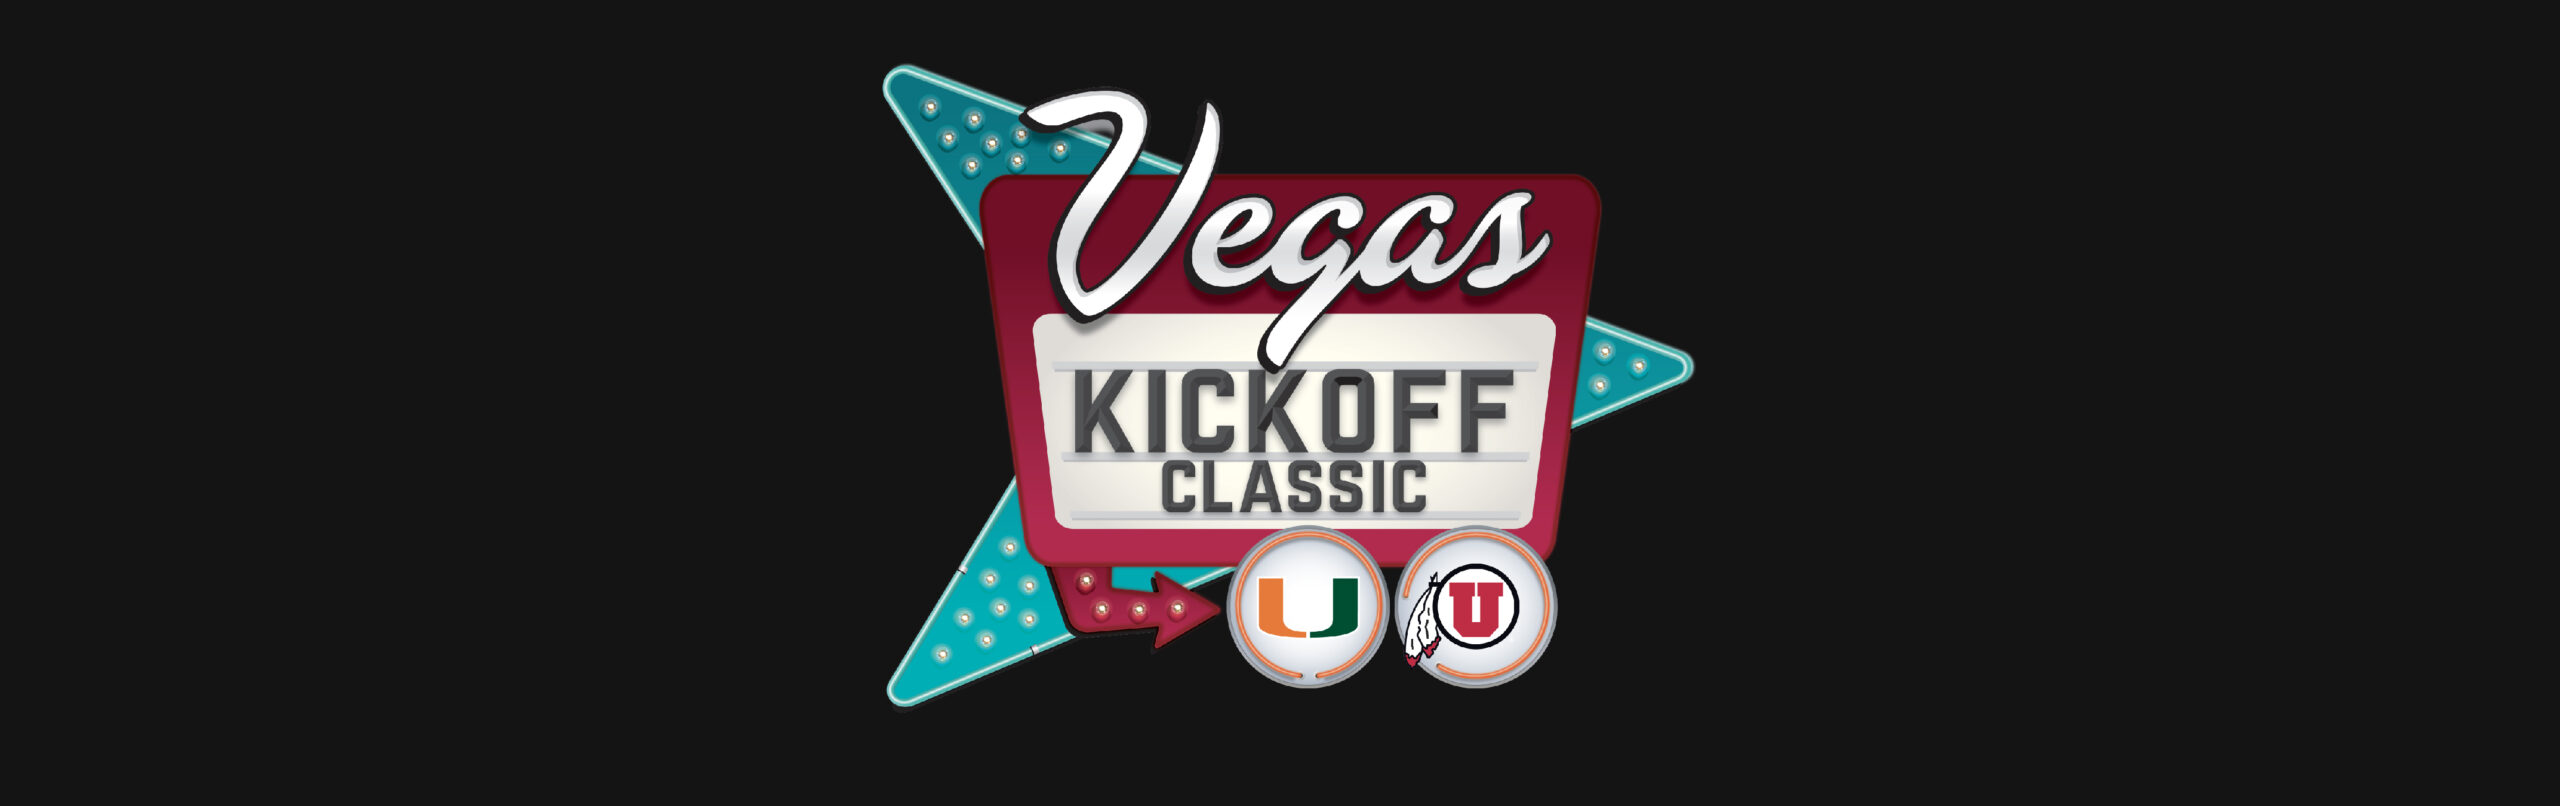 U Need to be There: 2027 Vegas Kickoff Classic to Feature Historic First Meeting Between Utah and Miami